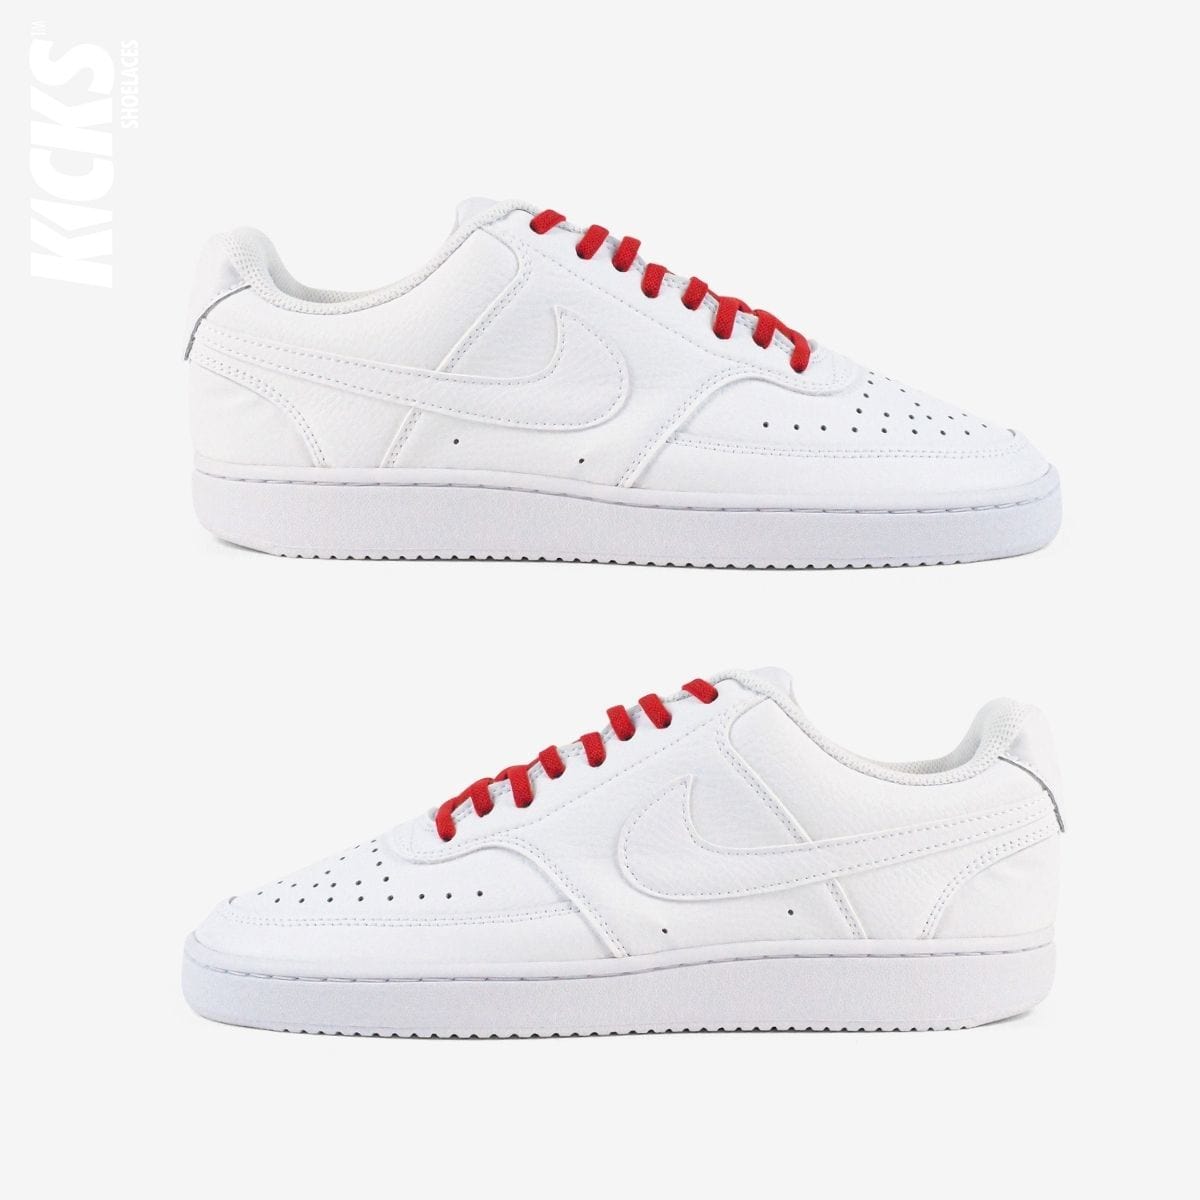 tieless-laces-with-red-laces-on-nike-white-sneakers-by-kicks-shoelaces